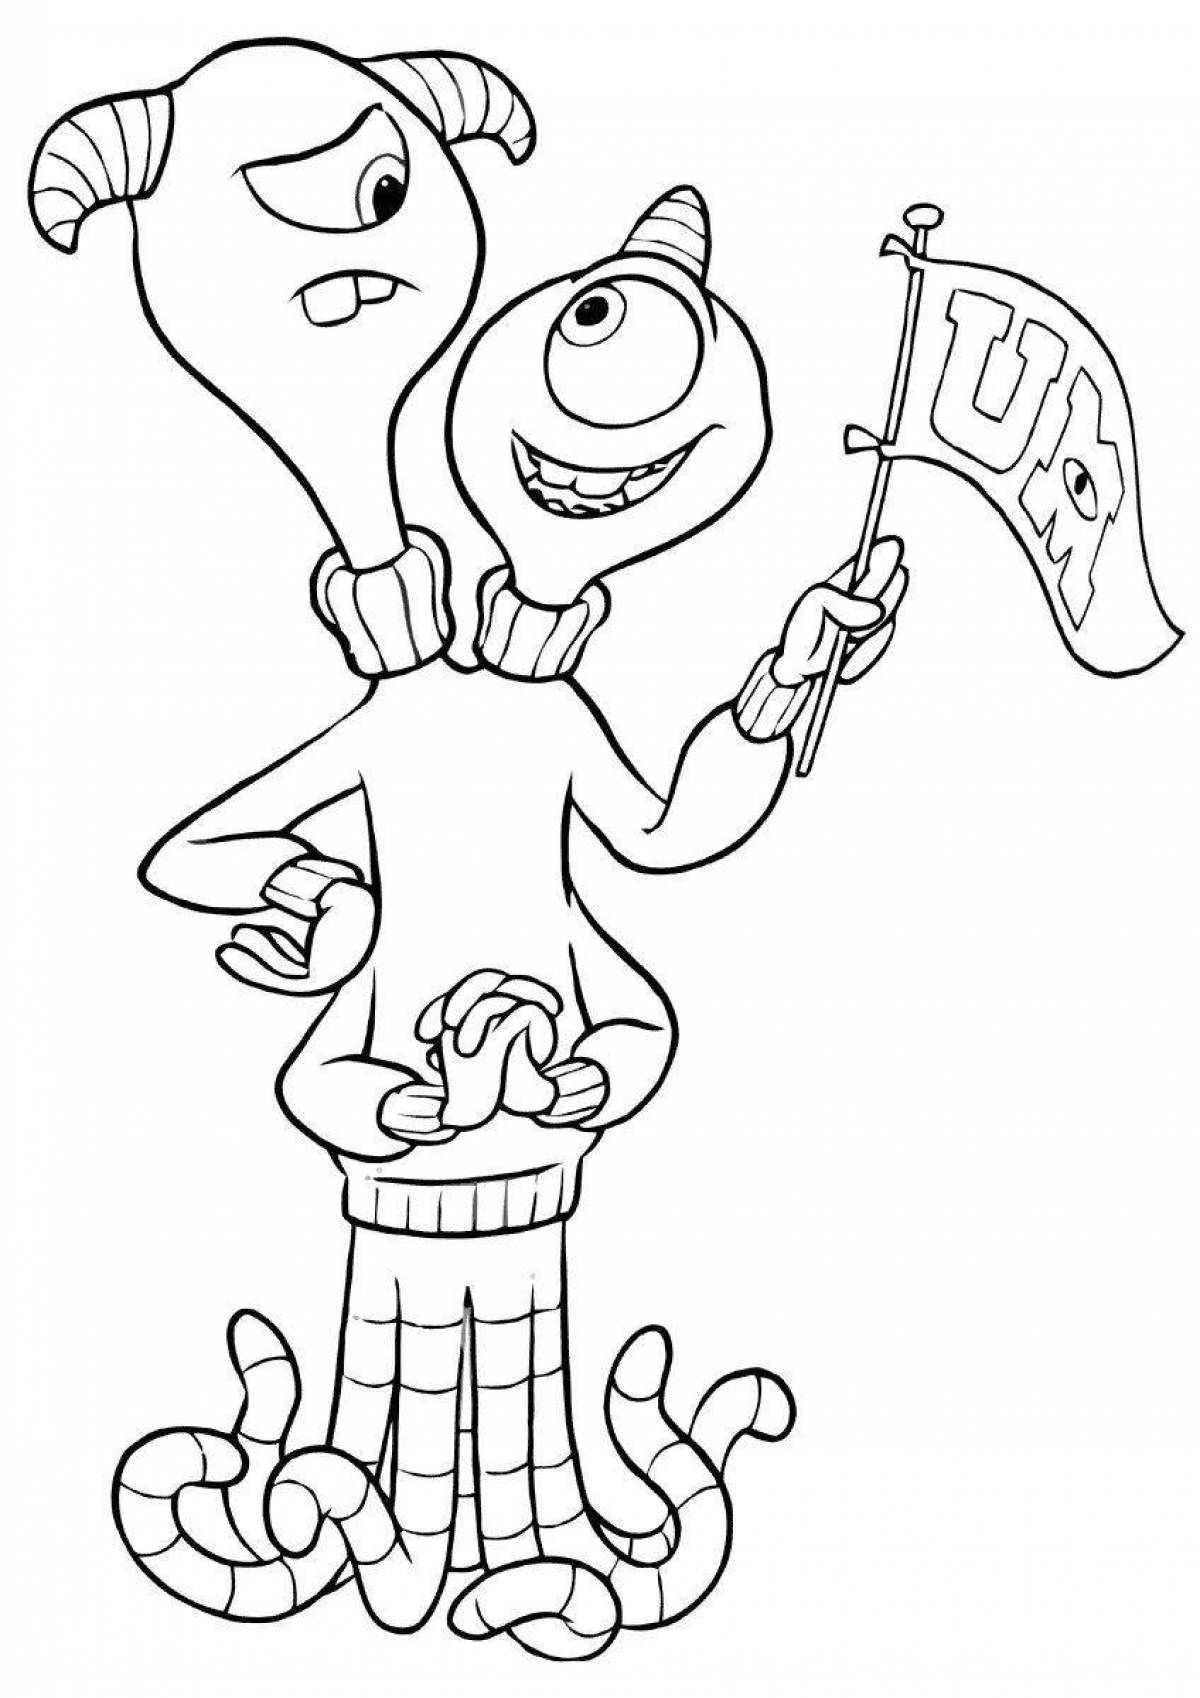 Flawless Monsters University coloring page